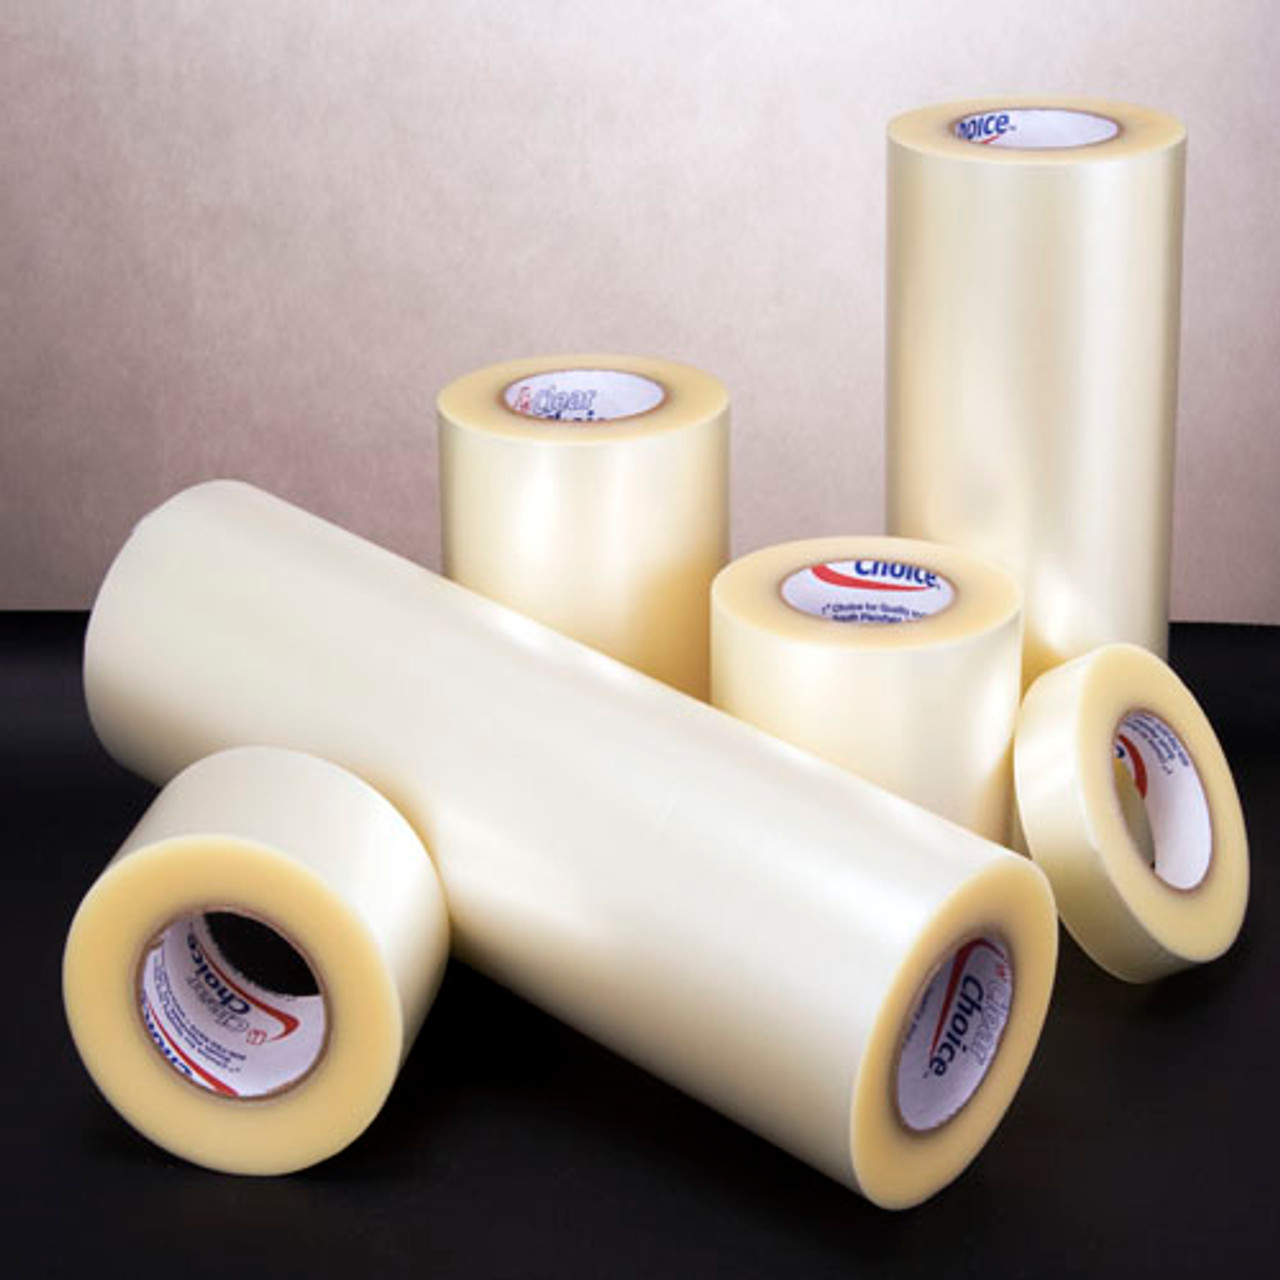 Transfer Tape for Vinyl, 24 inch x 100 Feet, Clear Film with Medium-High Tack Adhesive. American-Made Application Tape for Vinyl Graphics